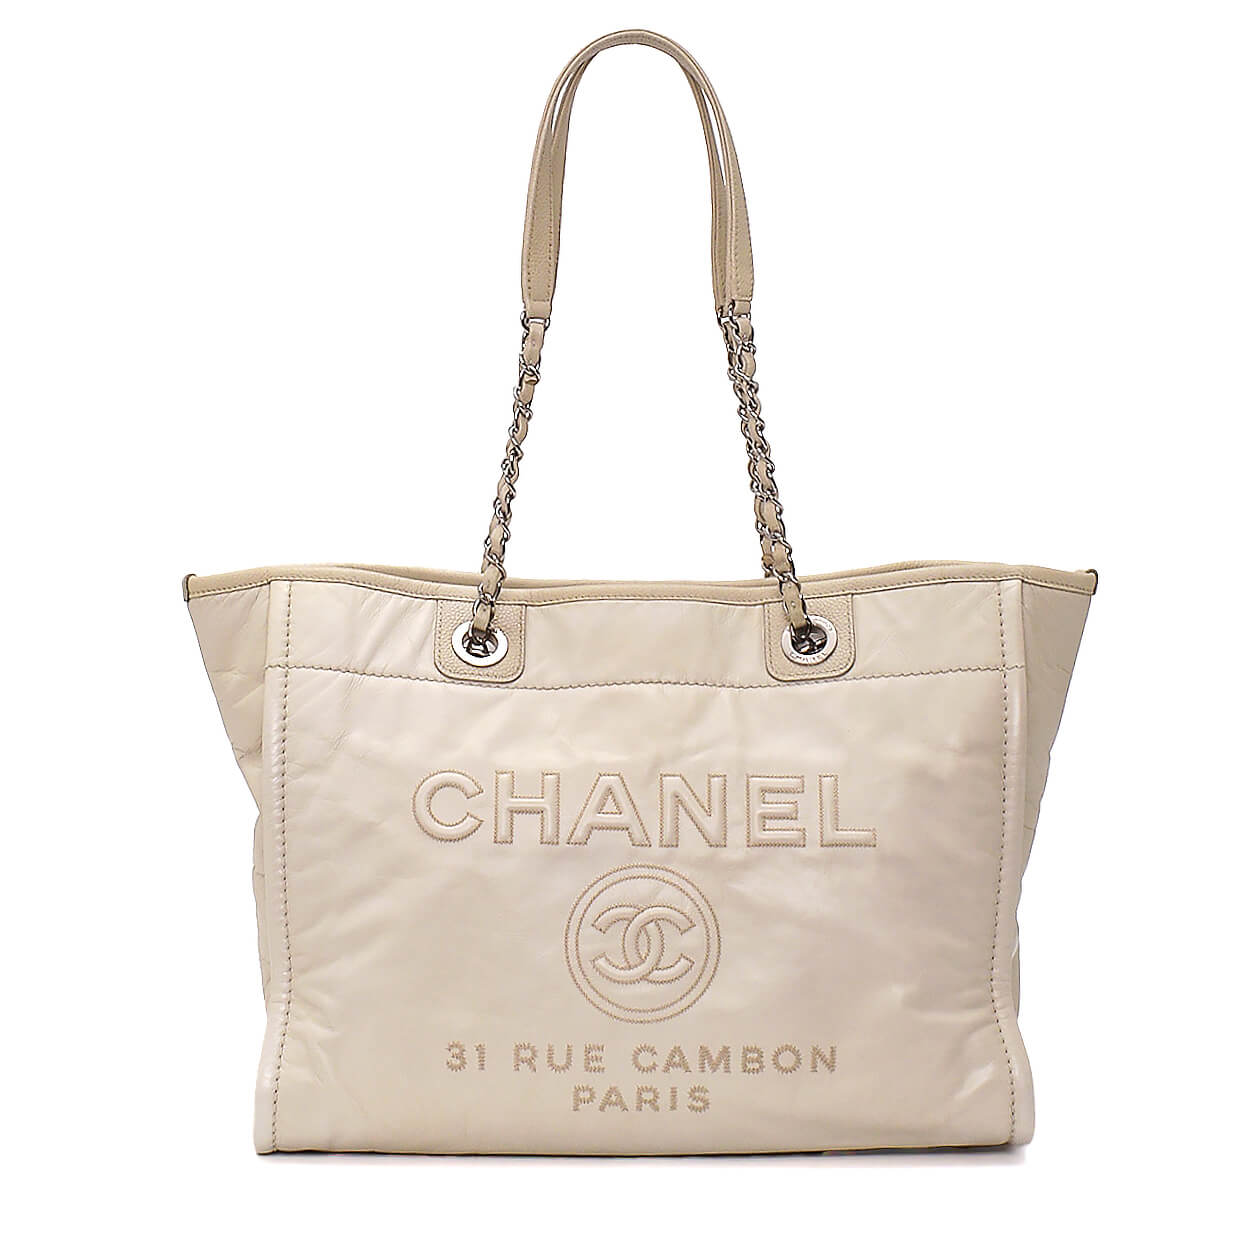 Chanel - White Leather Deauville Small Bag